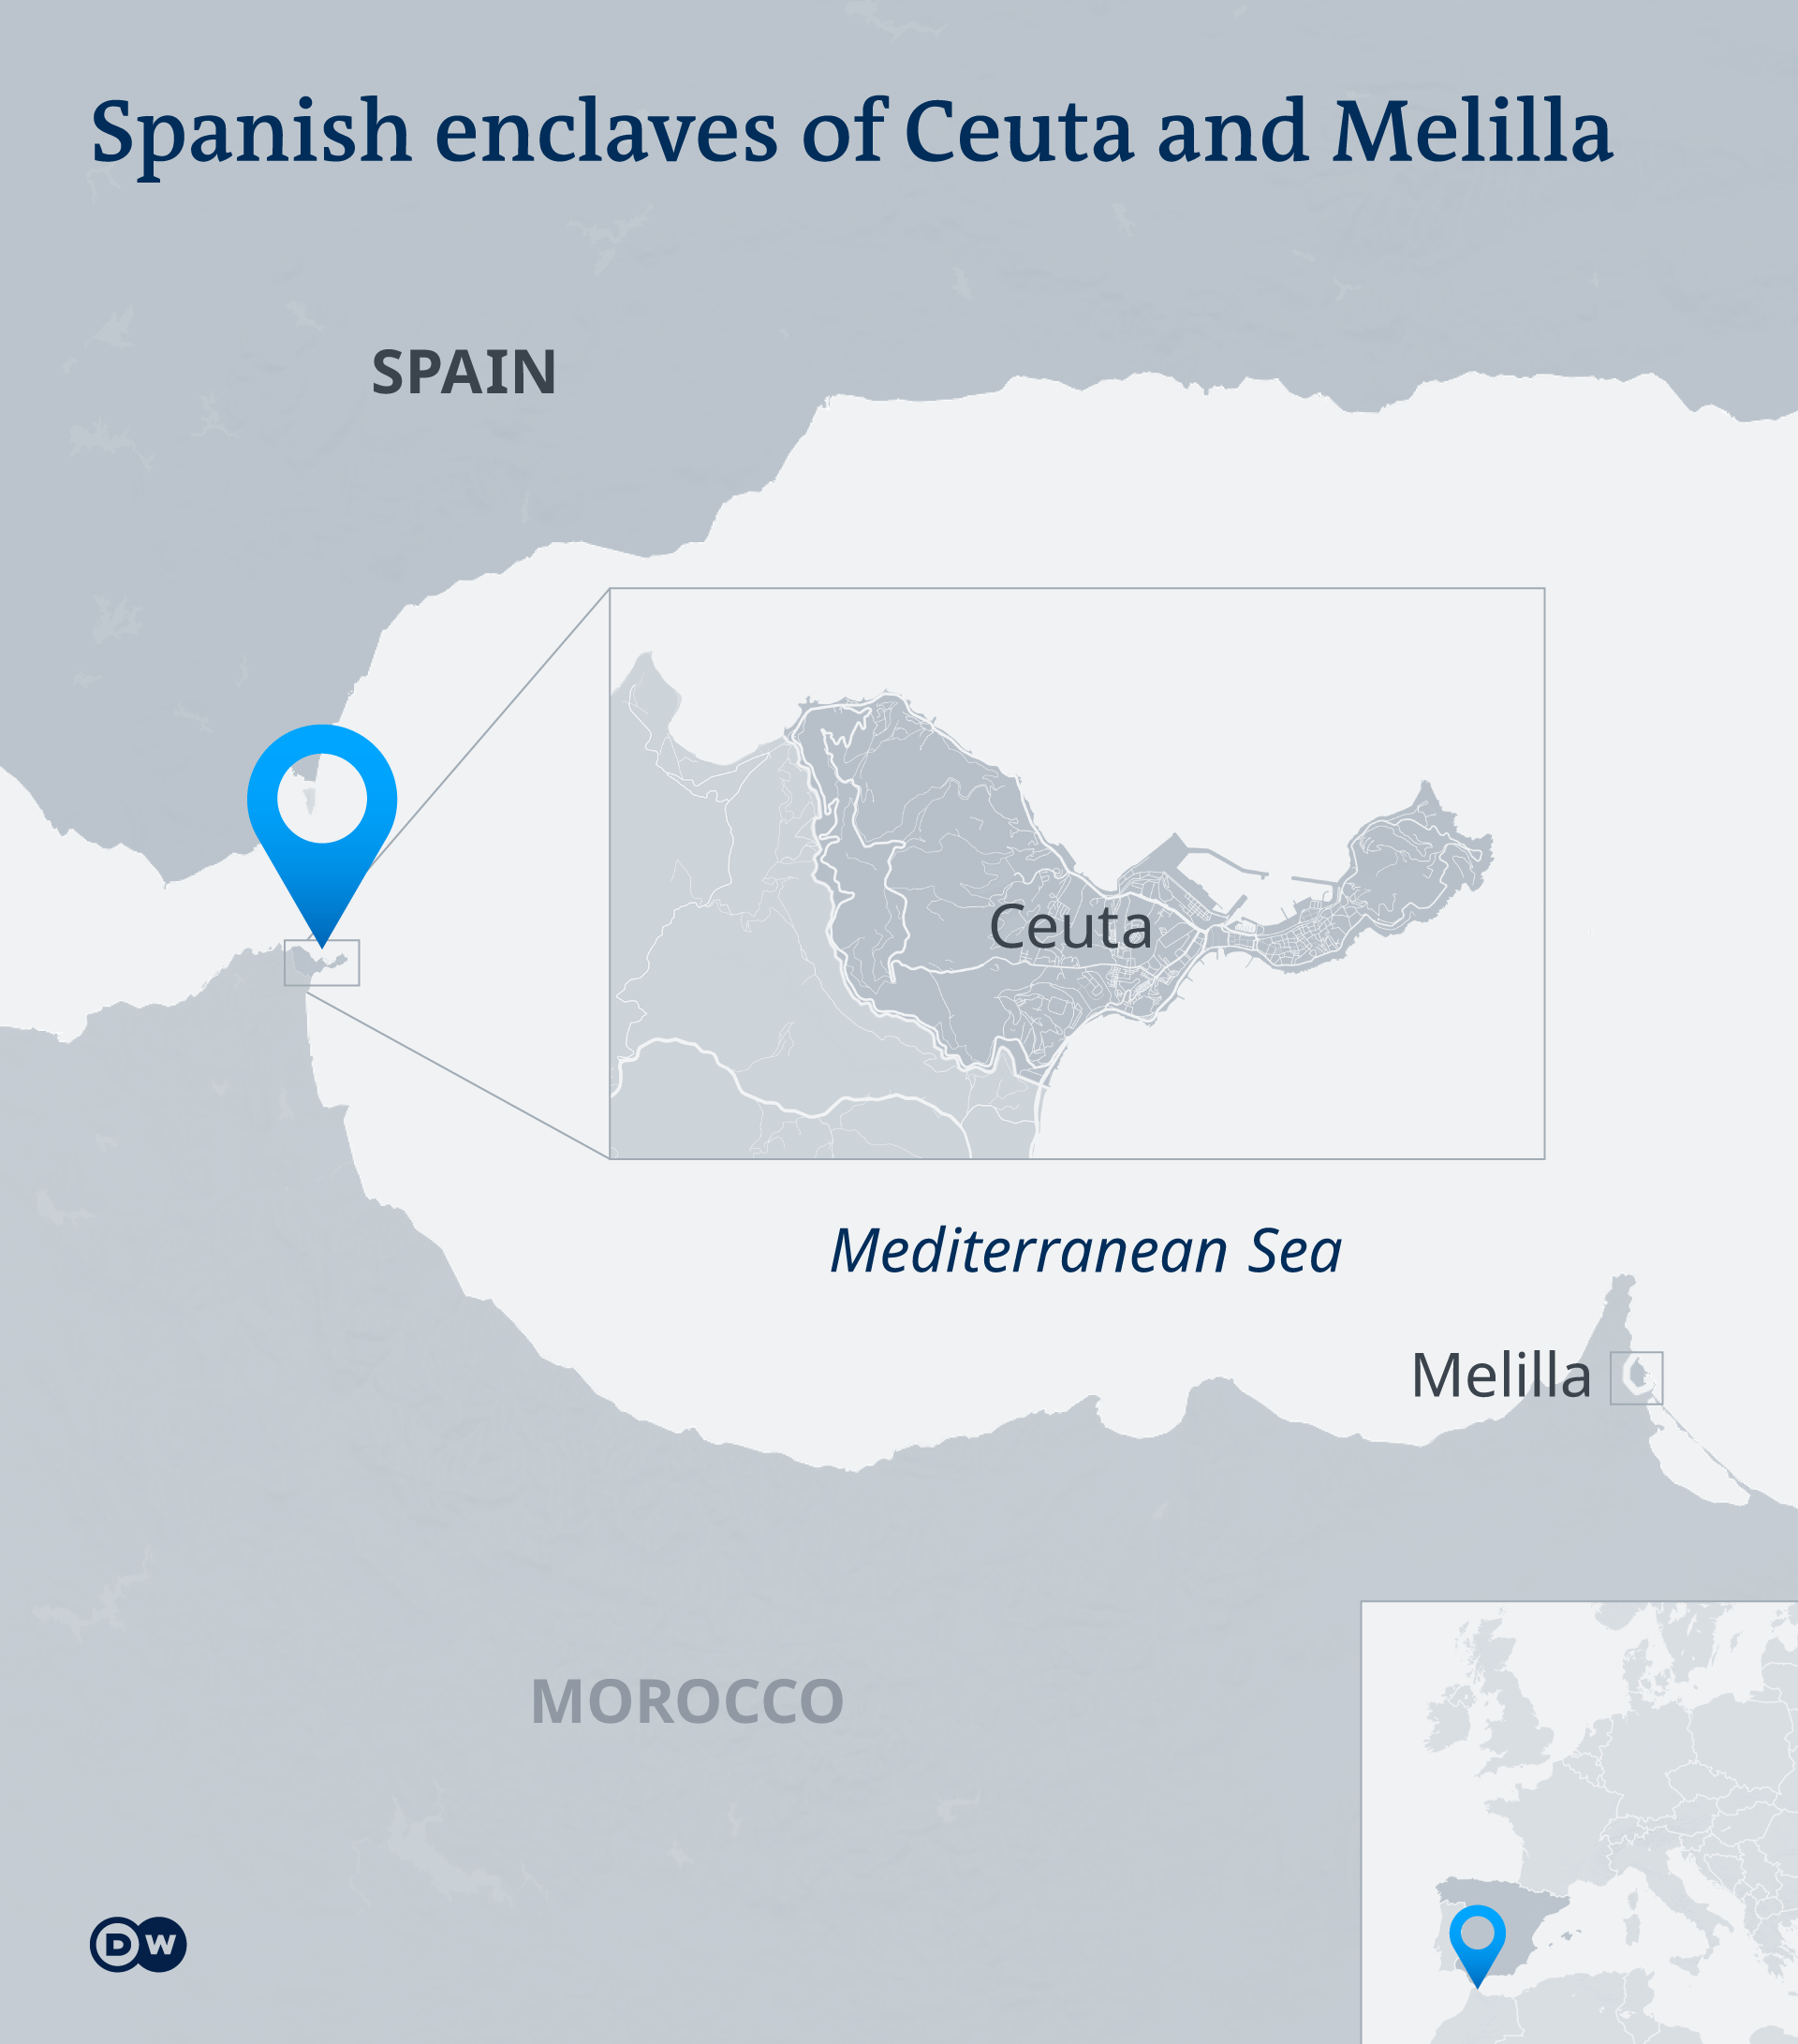 A map showing the locations of Ceuta and Melilla in north Africa